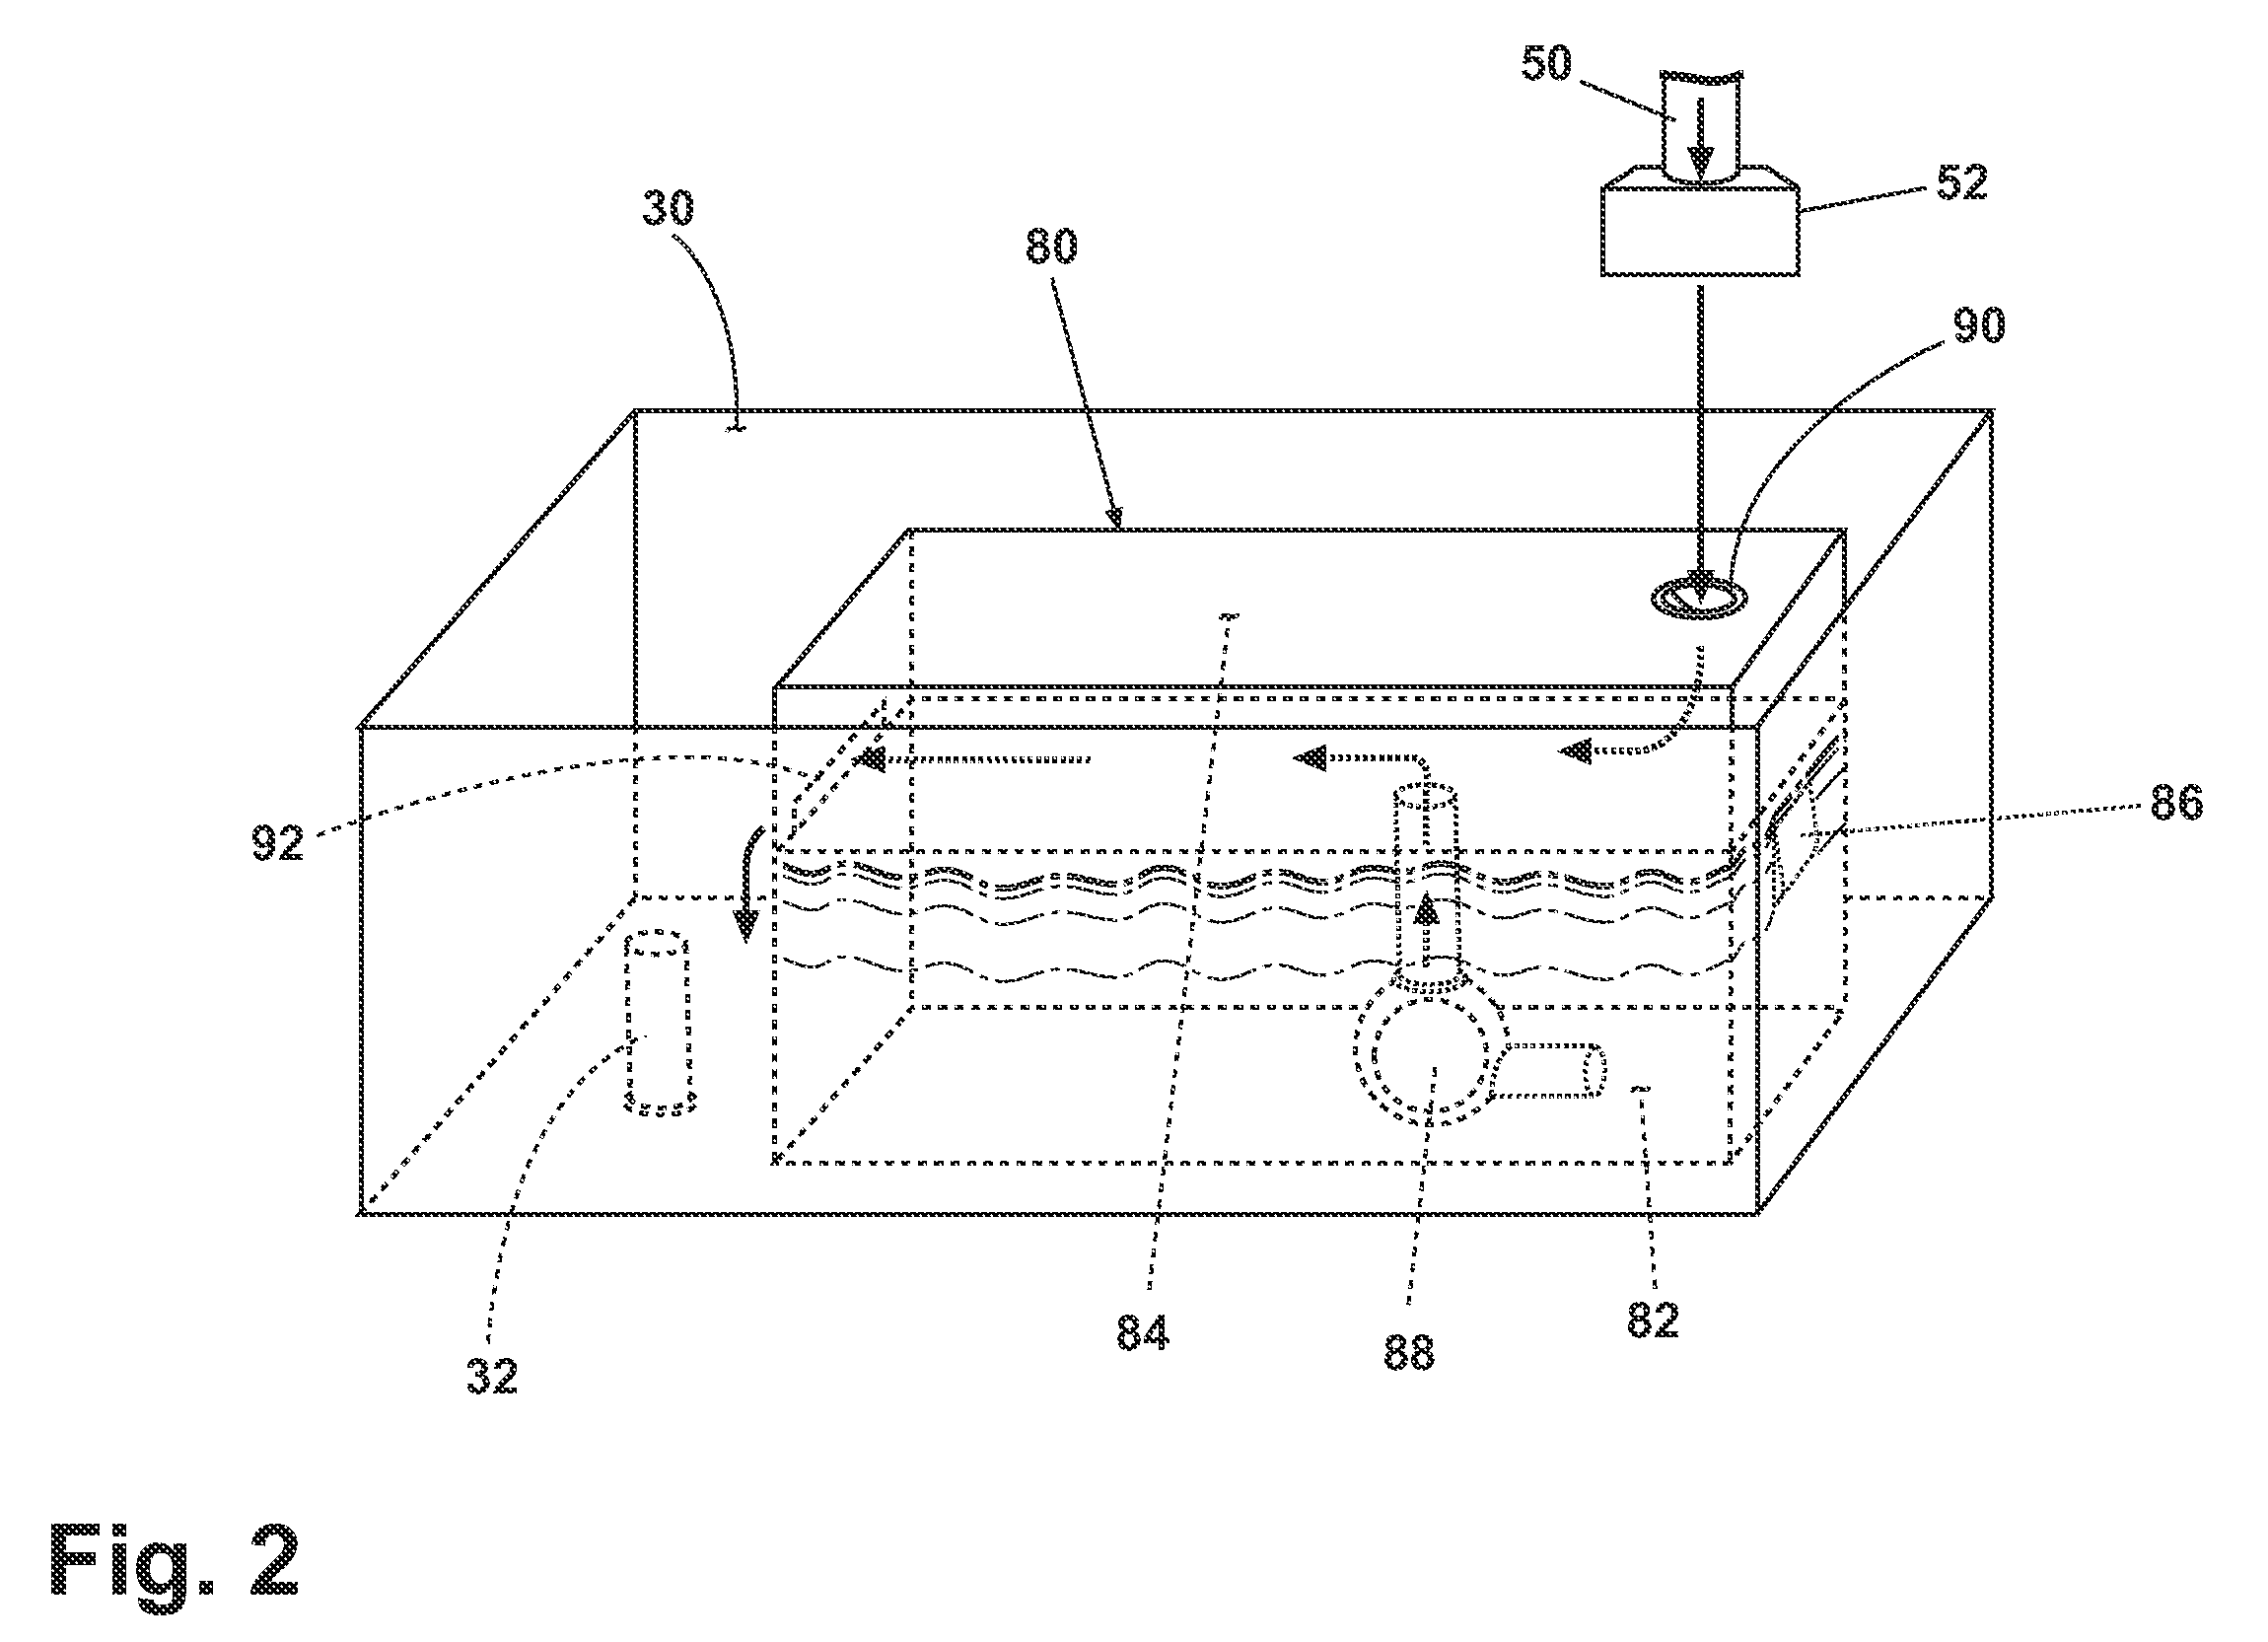 Household cleaning appliance with a single water flow path for both non-bulk and bulk dispensing